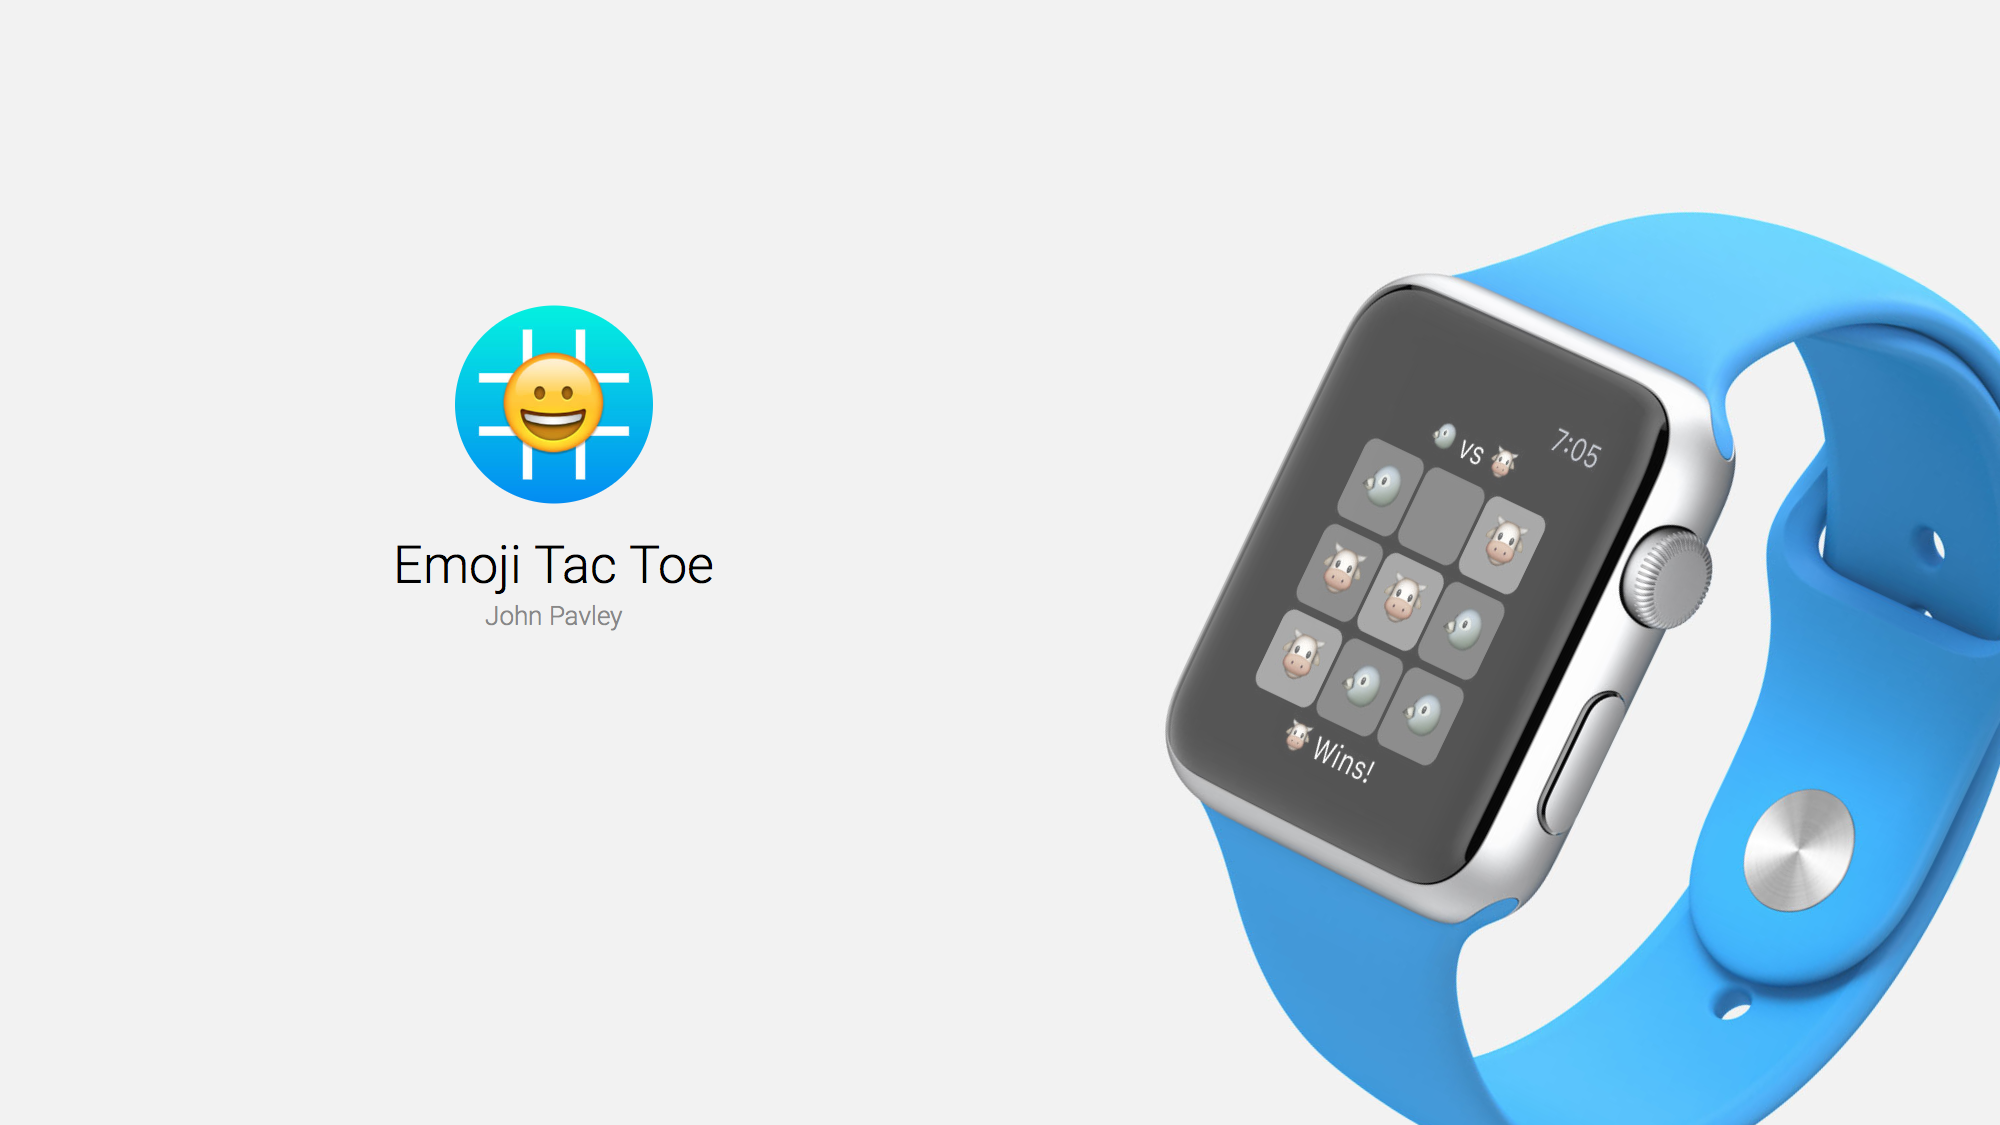 Emoji Tac Toe is a Quick Fix Game on the Apple Watch